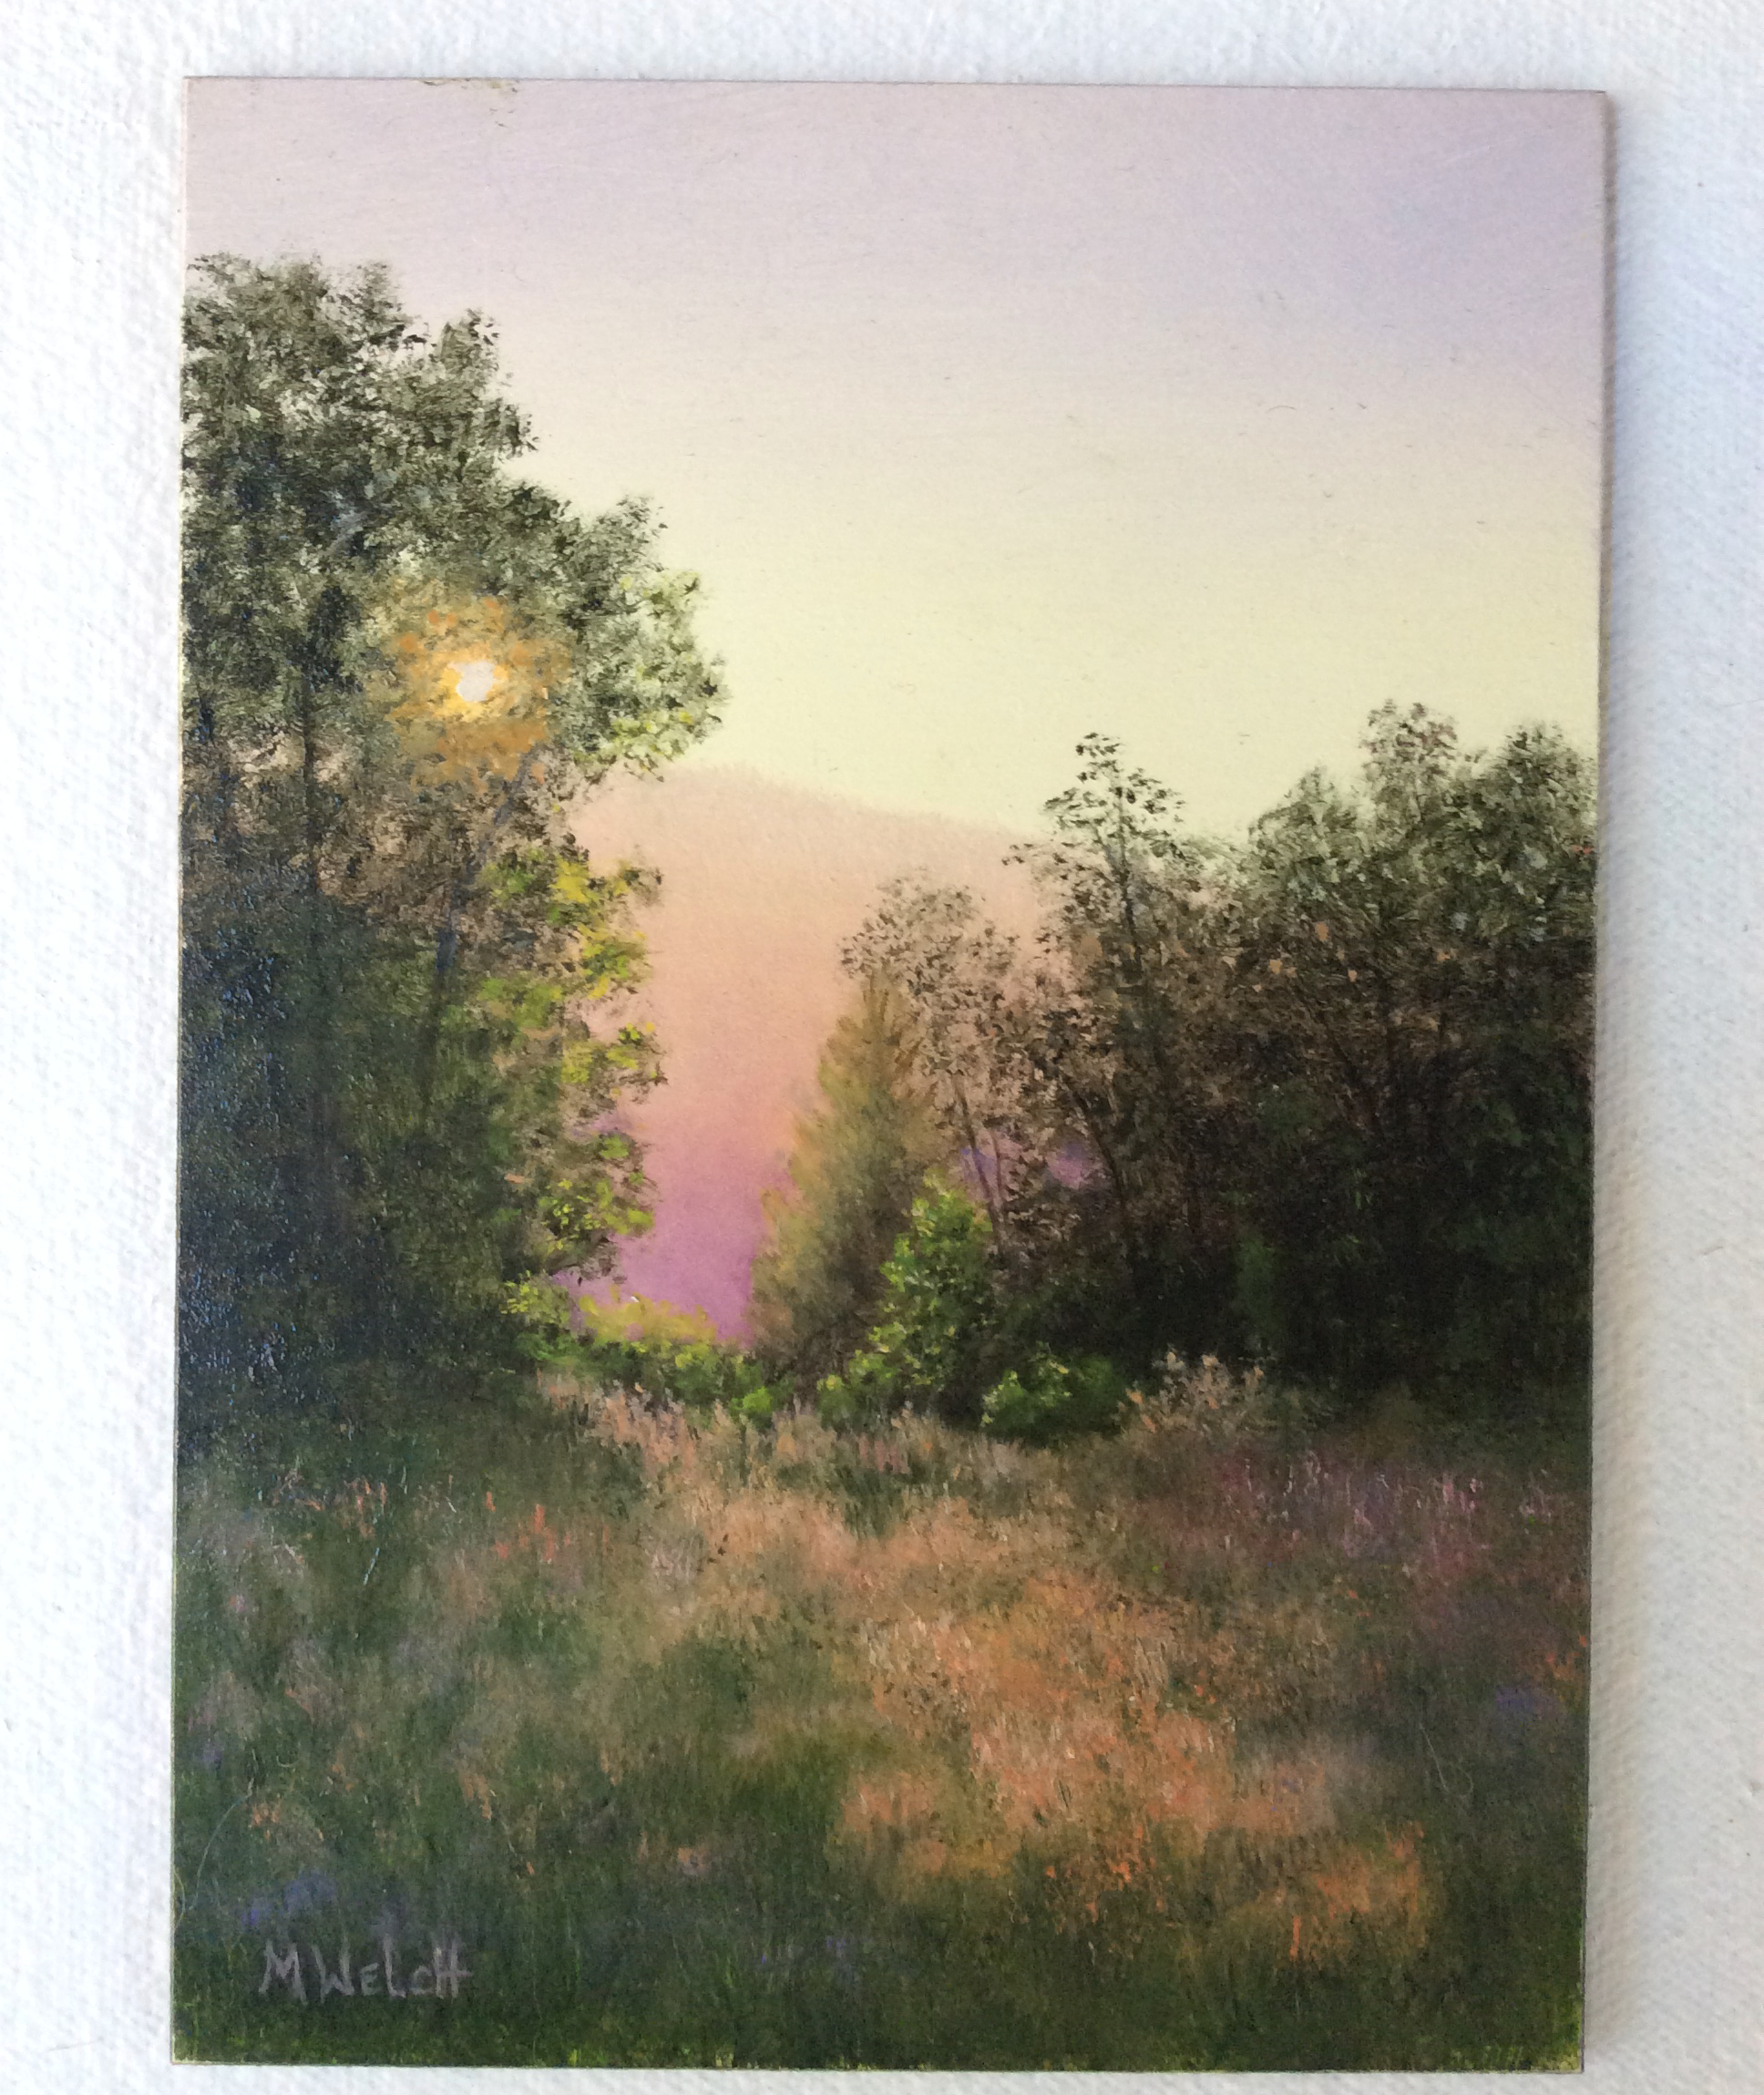 A painting of meadow grass and trees, with a low sun shining through over the horizon.